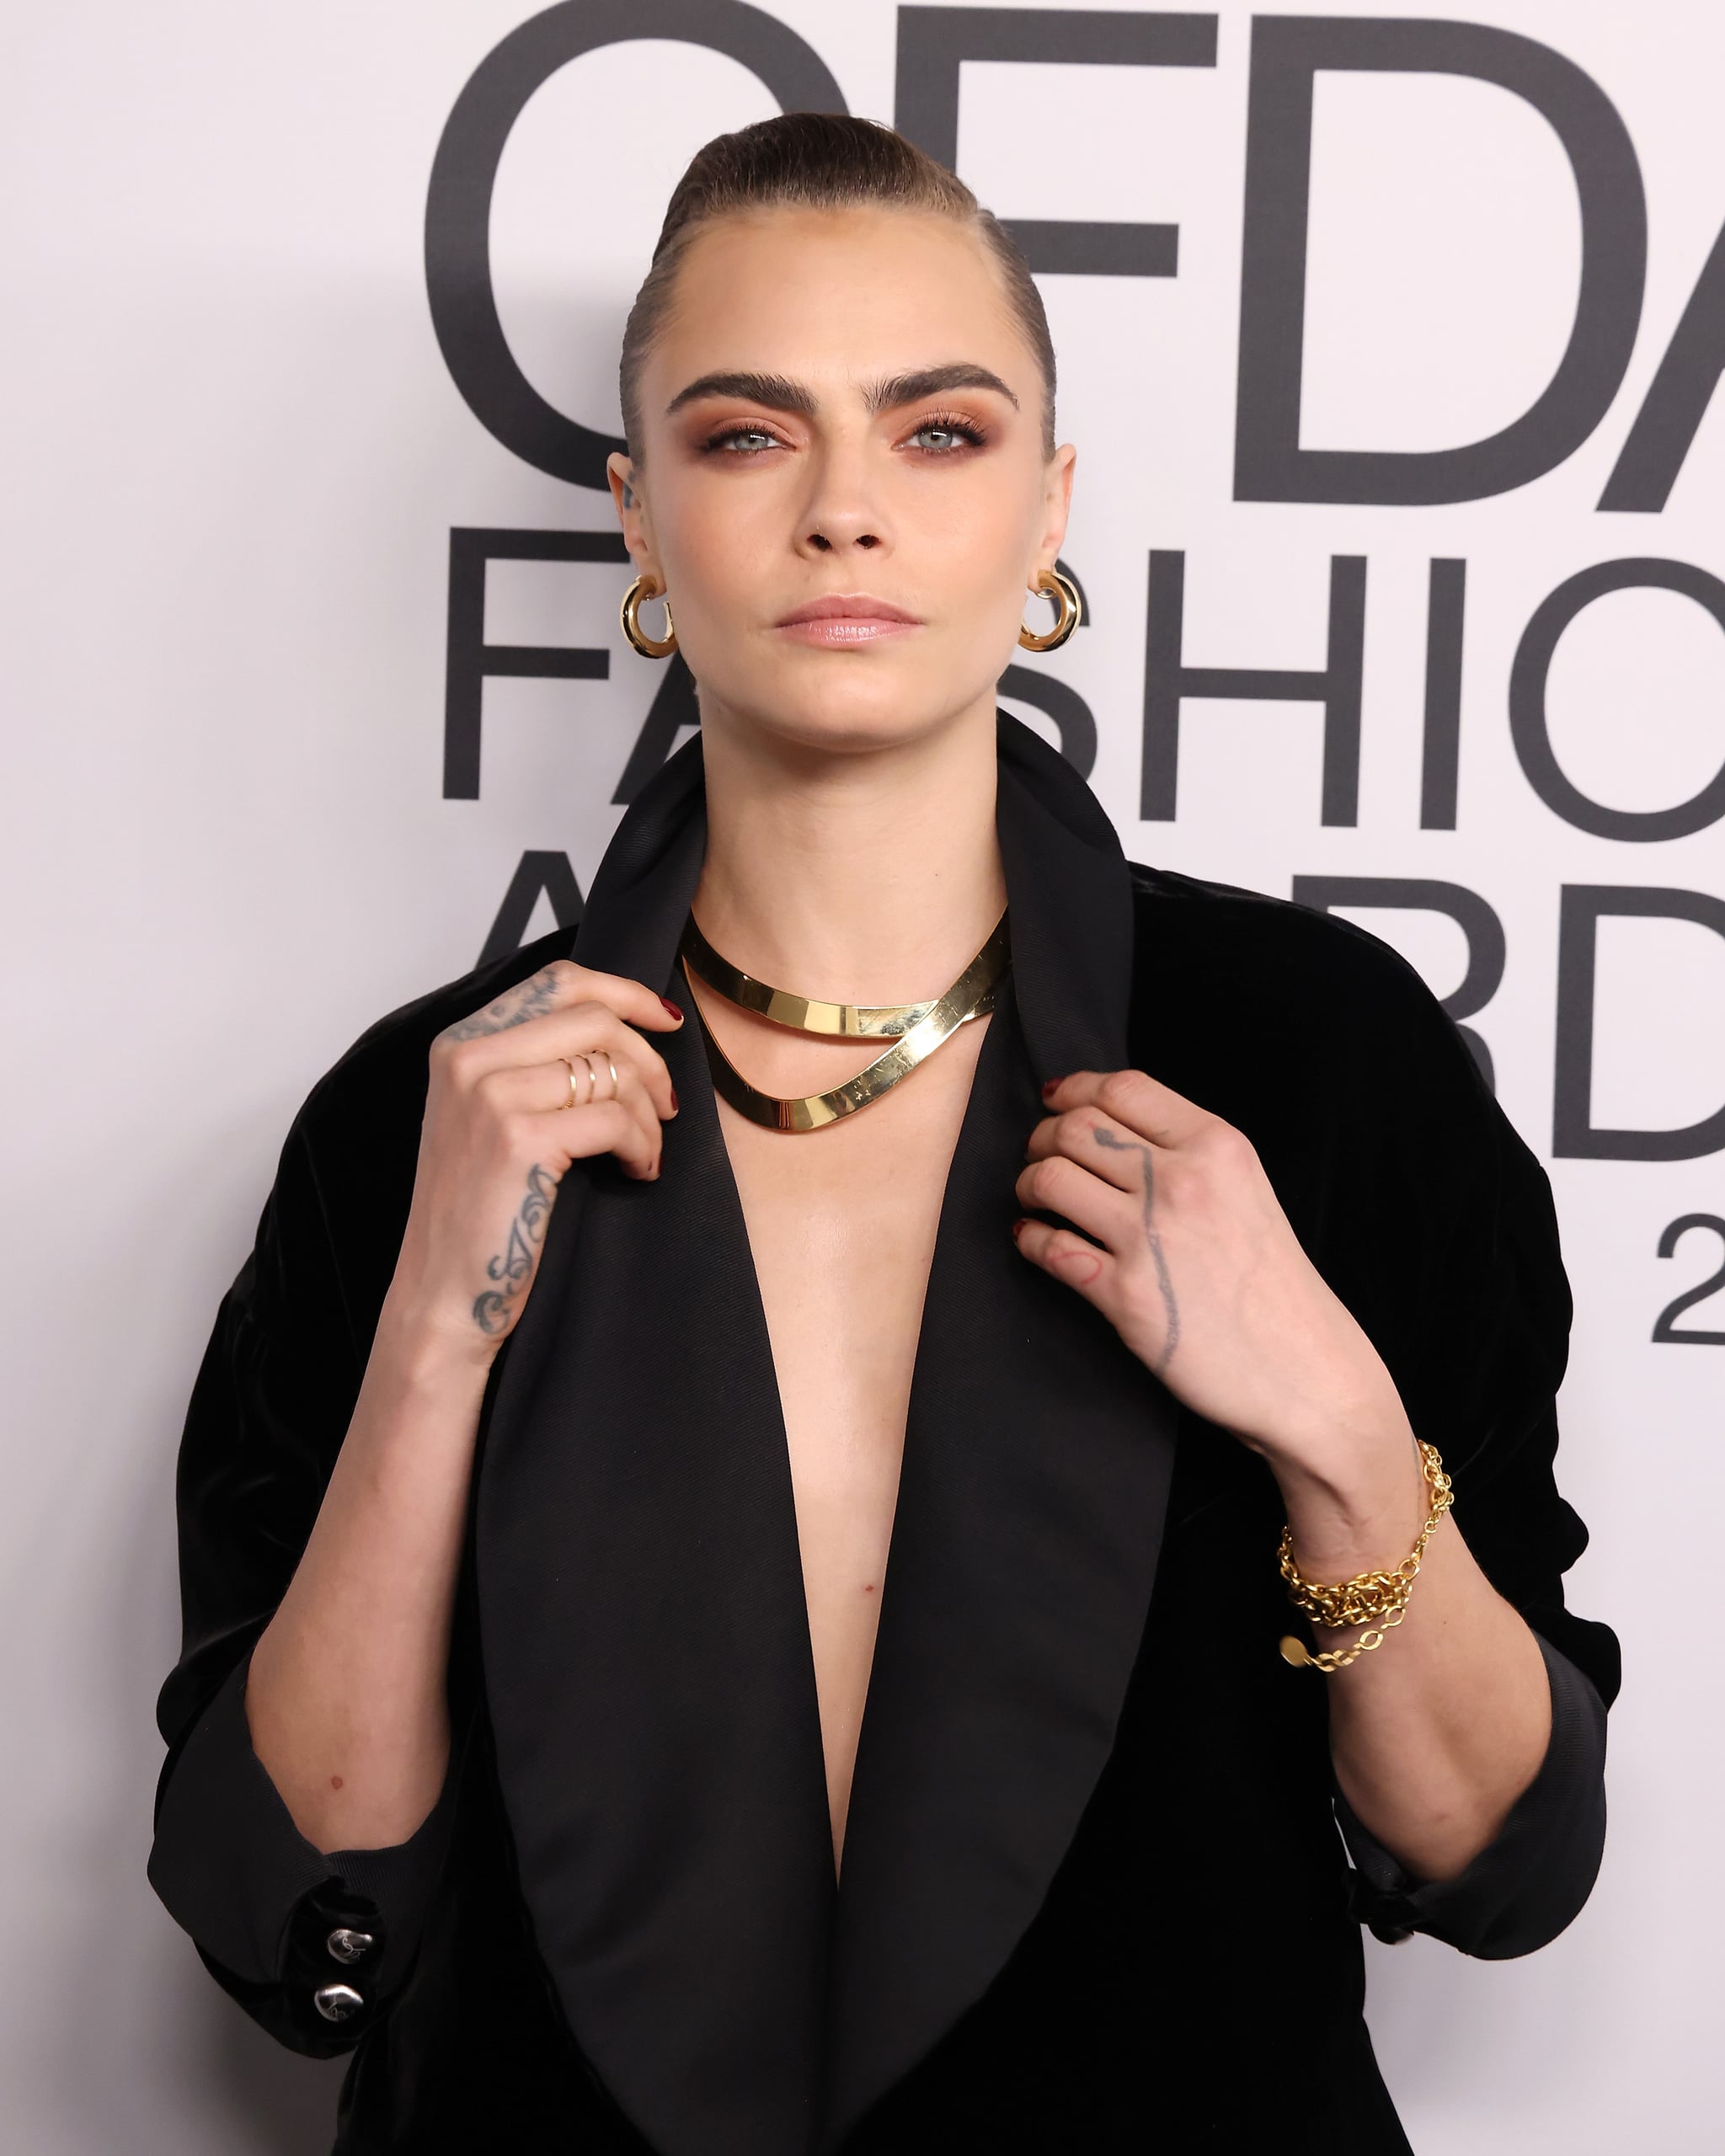 NEW YORK, NEW YORK - NOVEMBER 10: Cara Delvingne attends the 2021 CFDA Awards at The Seagram Building on November 10, 2021 in New York City. (Photo by Taylor Hill/FilmMagic)